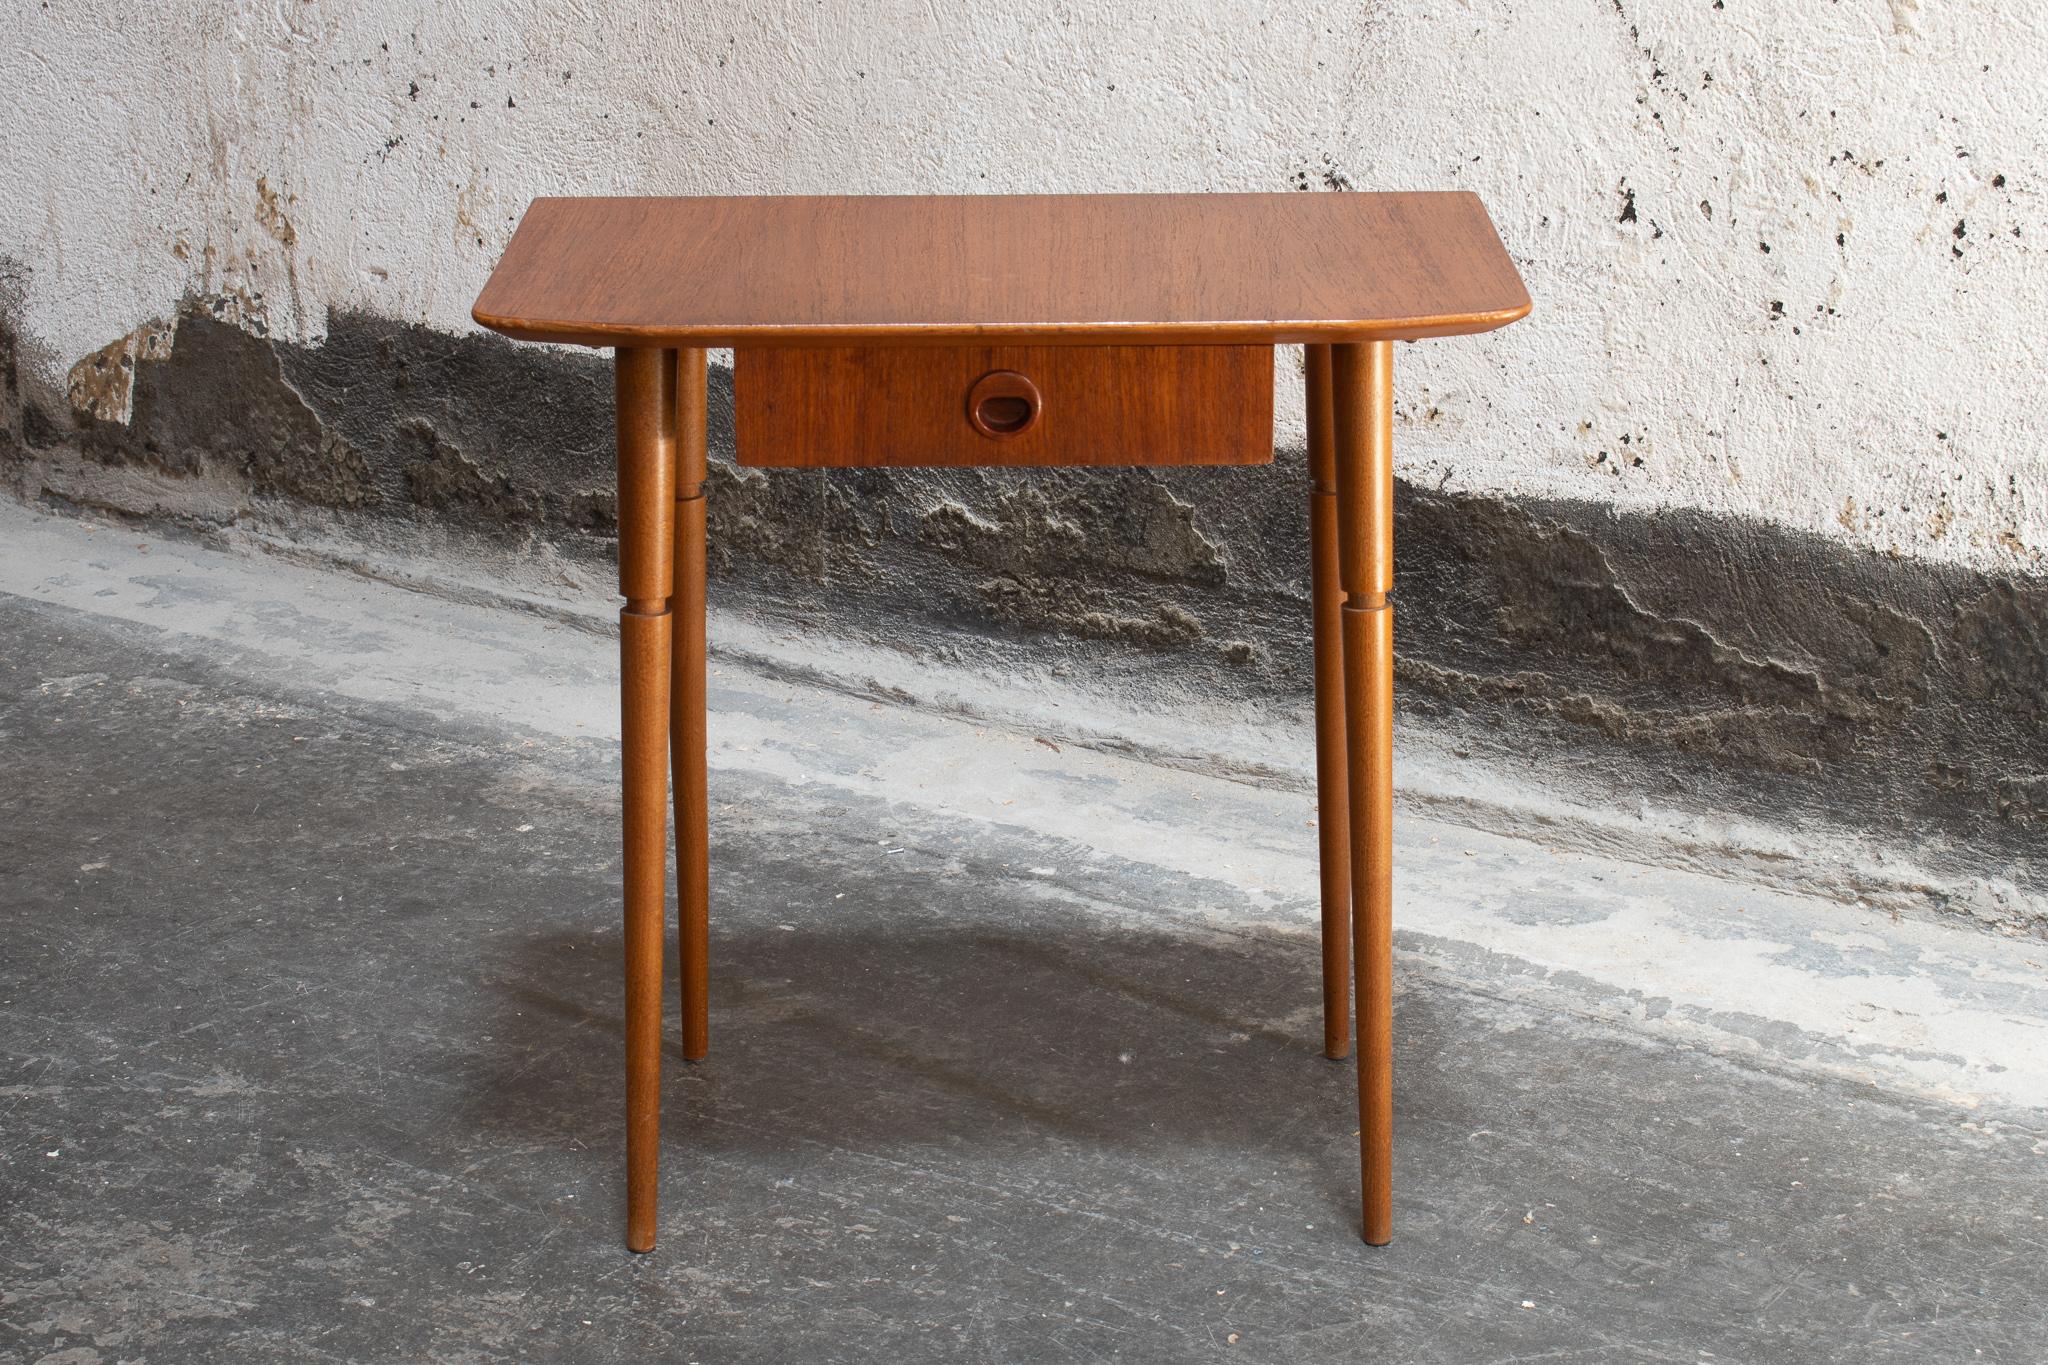 Mid Century Modern nightstand from Sweden, circa 1960. This Scandinavian teak side table has a slight curve at the edge of the tabletop, turned tapered legs, and a small drawer with a mid-mod pull. This Swedish Modern table is perfectly sized for